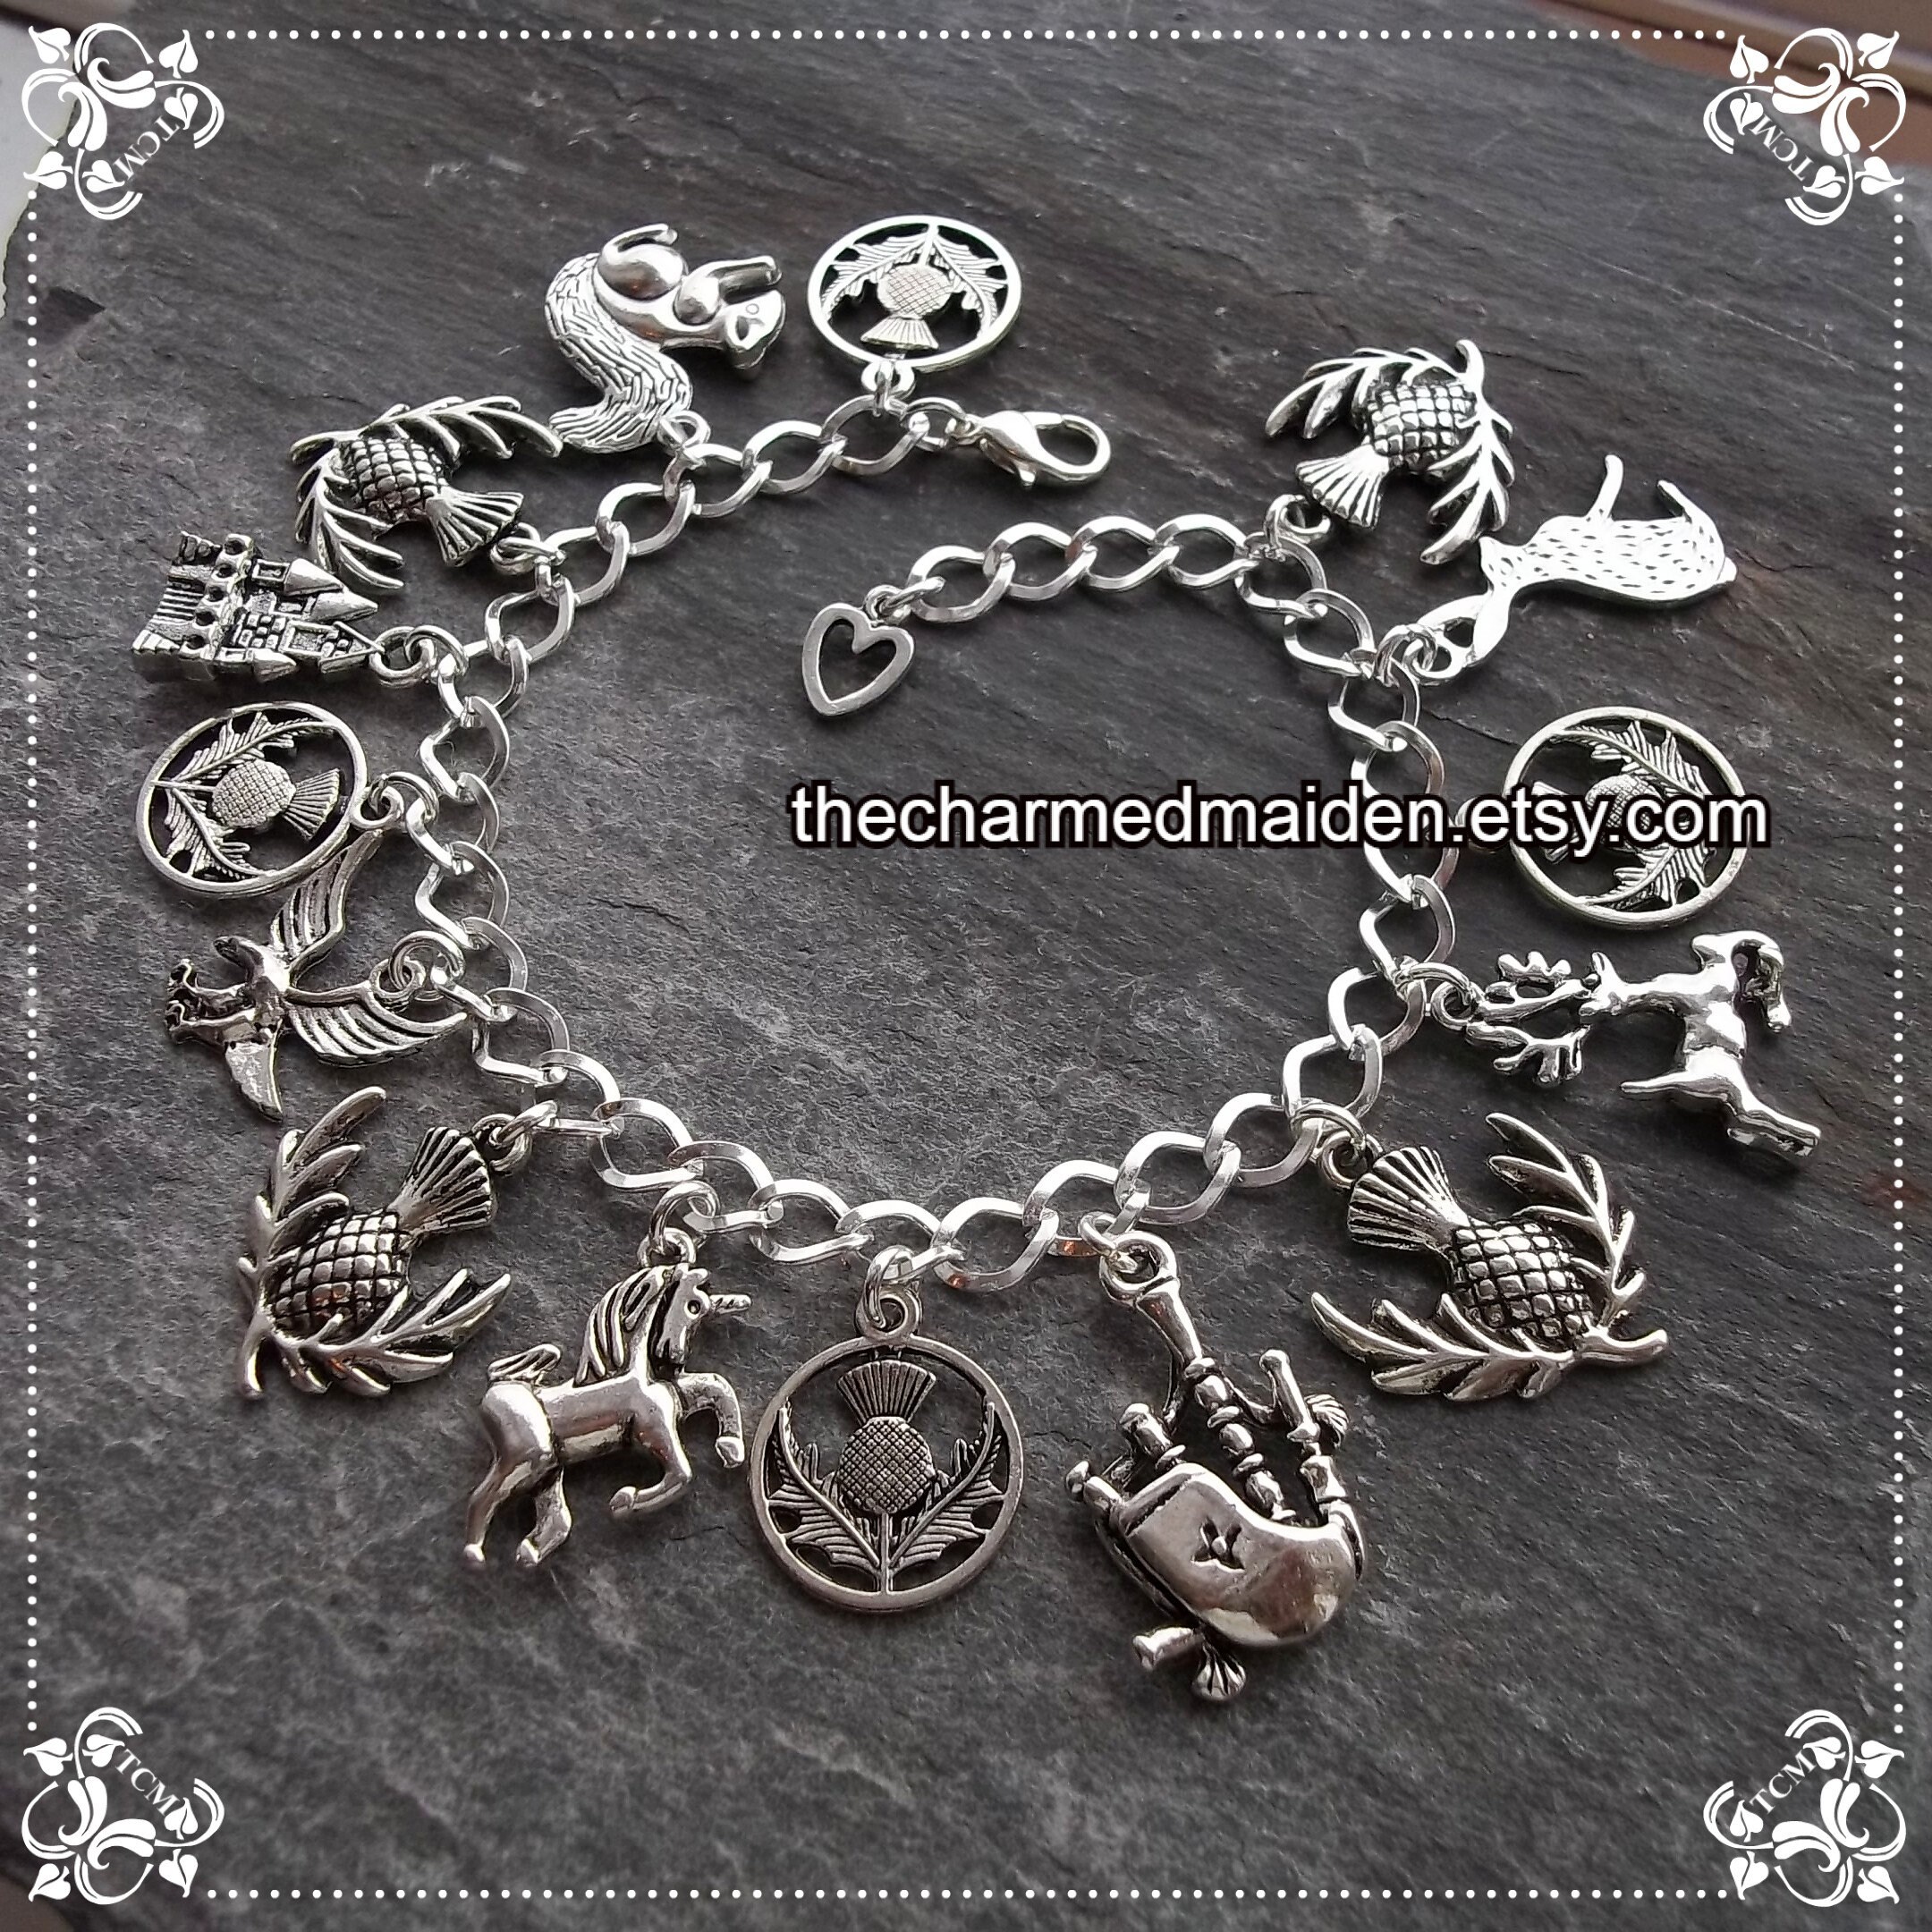 New coquette charm bracelets now available on my etsy! there are three  variations and only one of each! ૮꒰ ˶• ༝ •˶꒱ა ♡ ... | Instagram